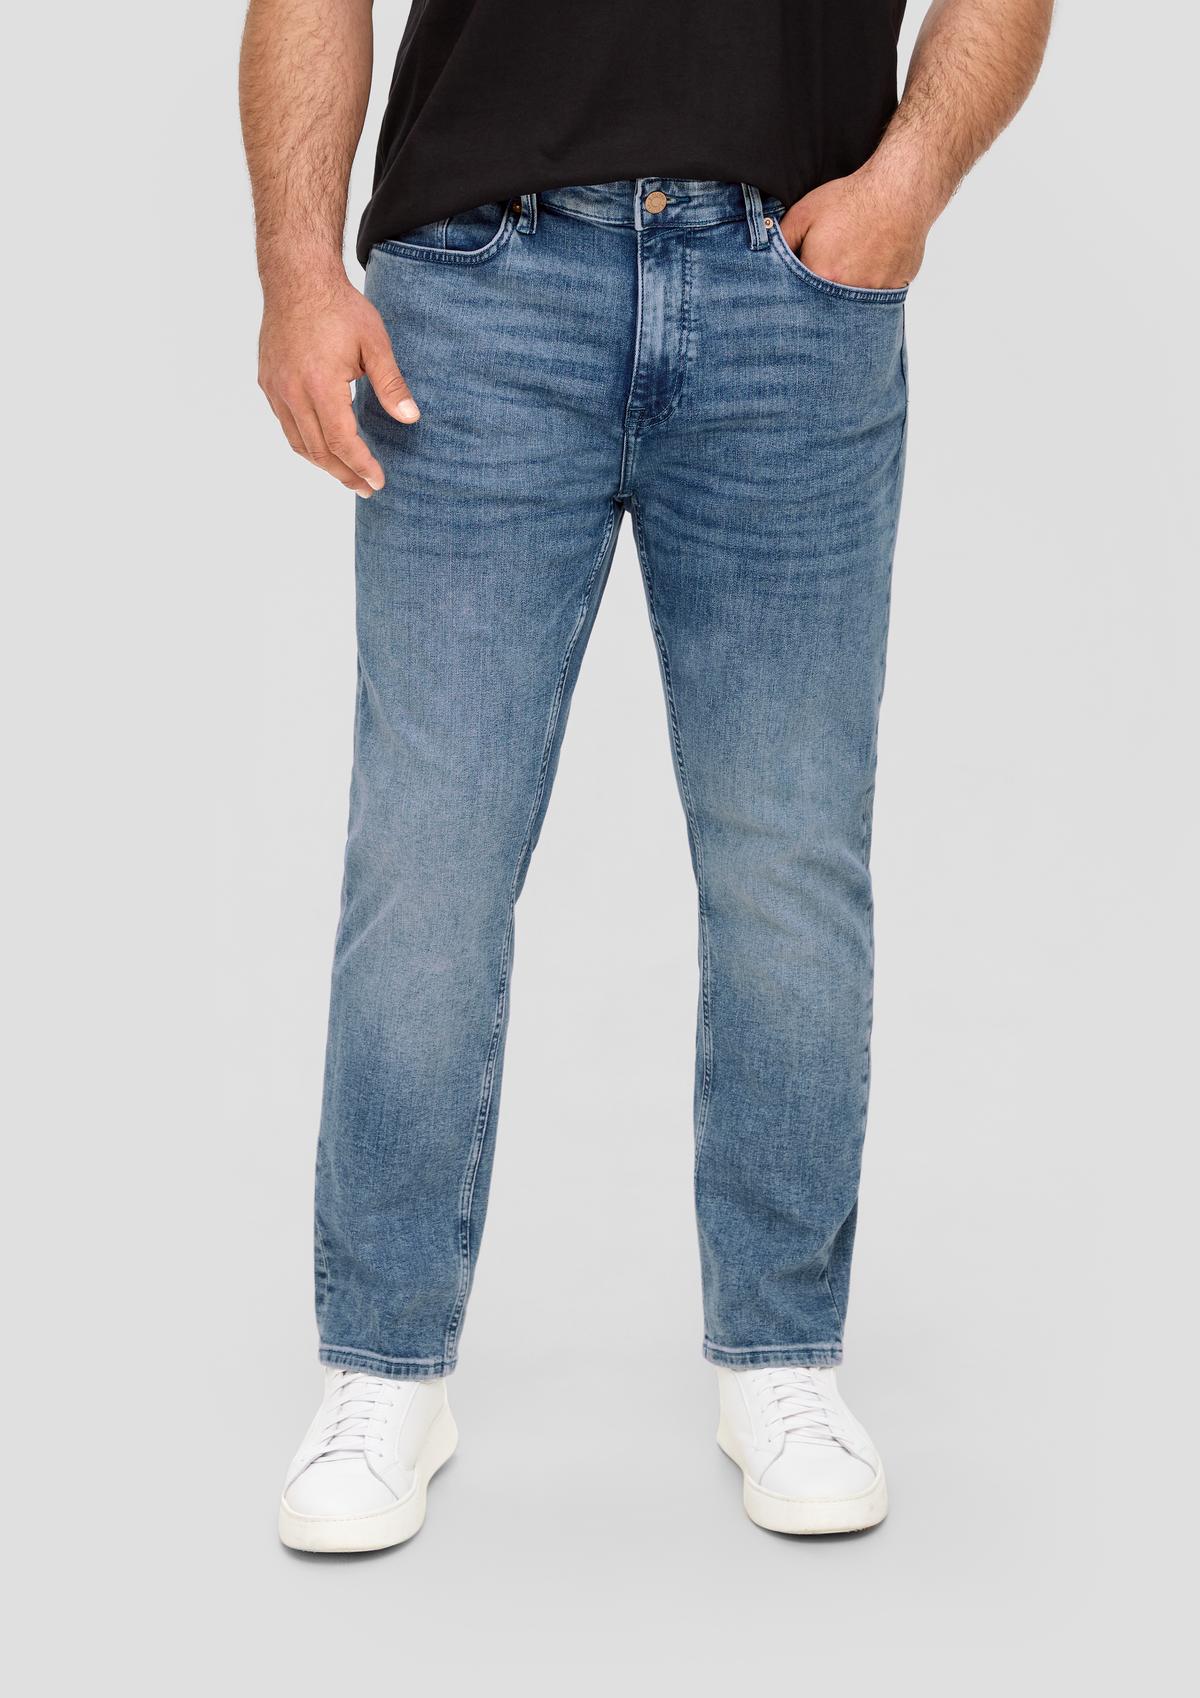 Jeans / Regular Fit / Mid Rise / Tapered Leg / 5-Pocket Style - deep blue